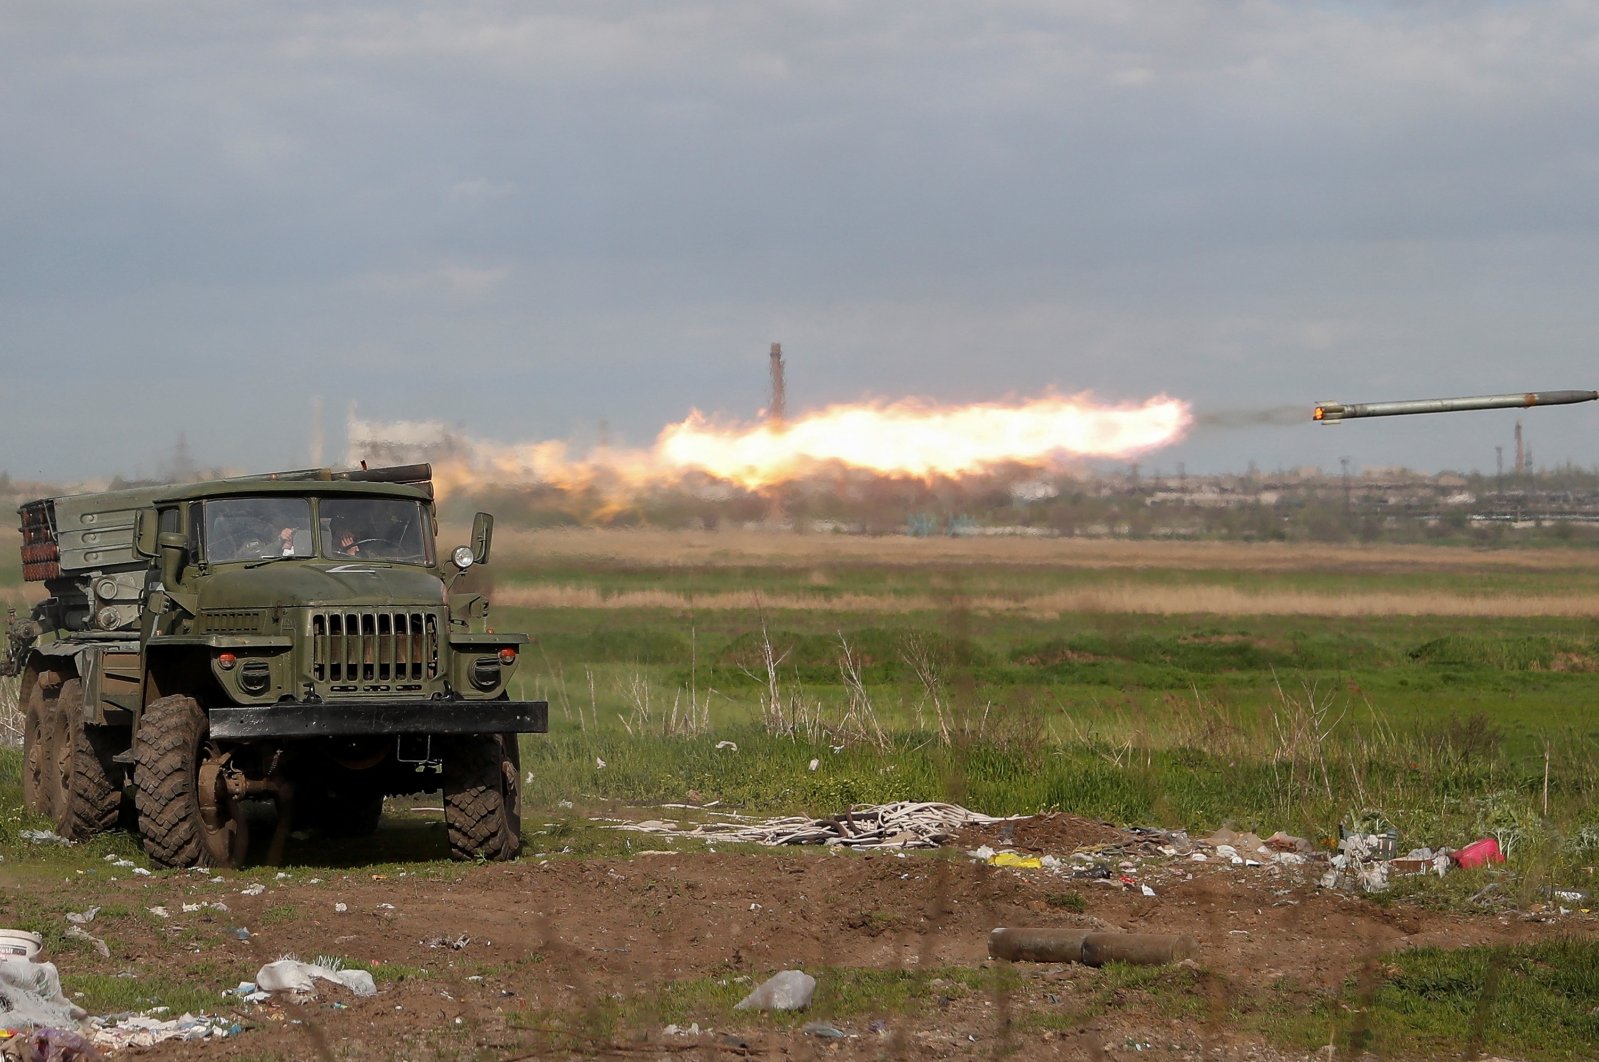 Service members of pro-Russian troops fire a BM-21 Grad multiple rocket launch system during fighting near the Azovstal Iron and Steel Works in the southern port city of Mariupol, Ukraine May 2, 2022. (Reuters Photo)